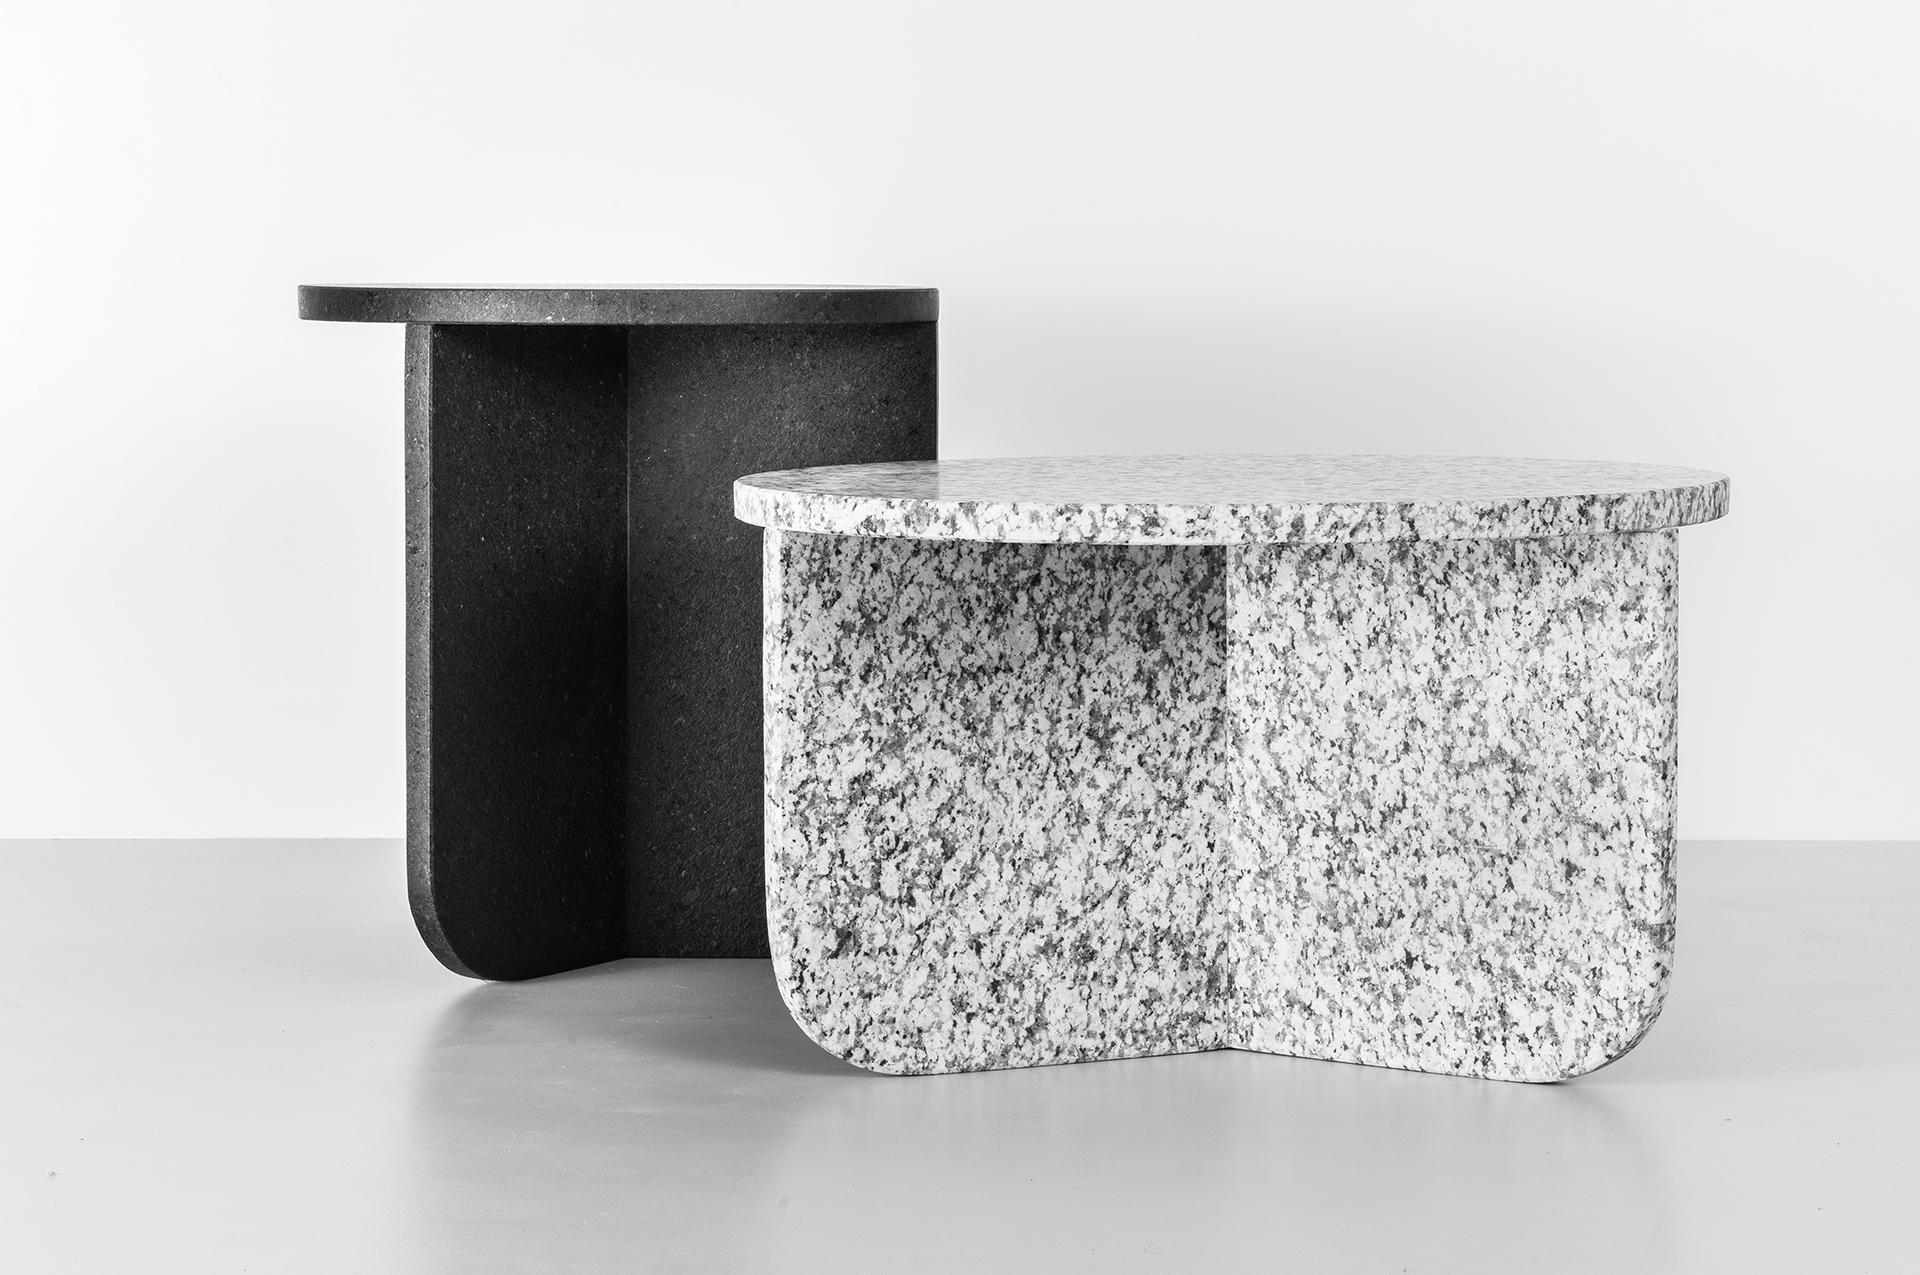 International Style Leme Table, Low, by RAIN, Contemporary Side Table, Brazilian Granite For Sale